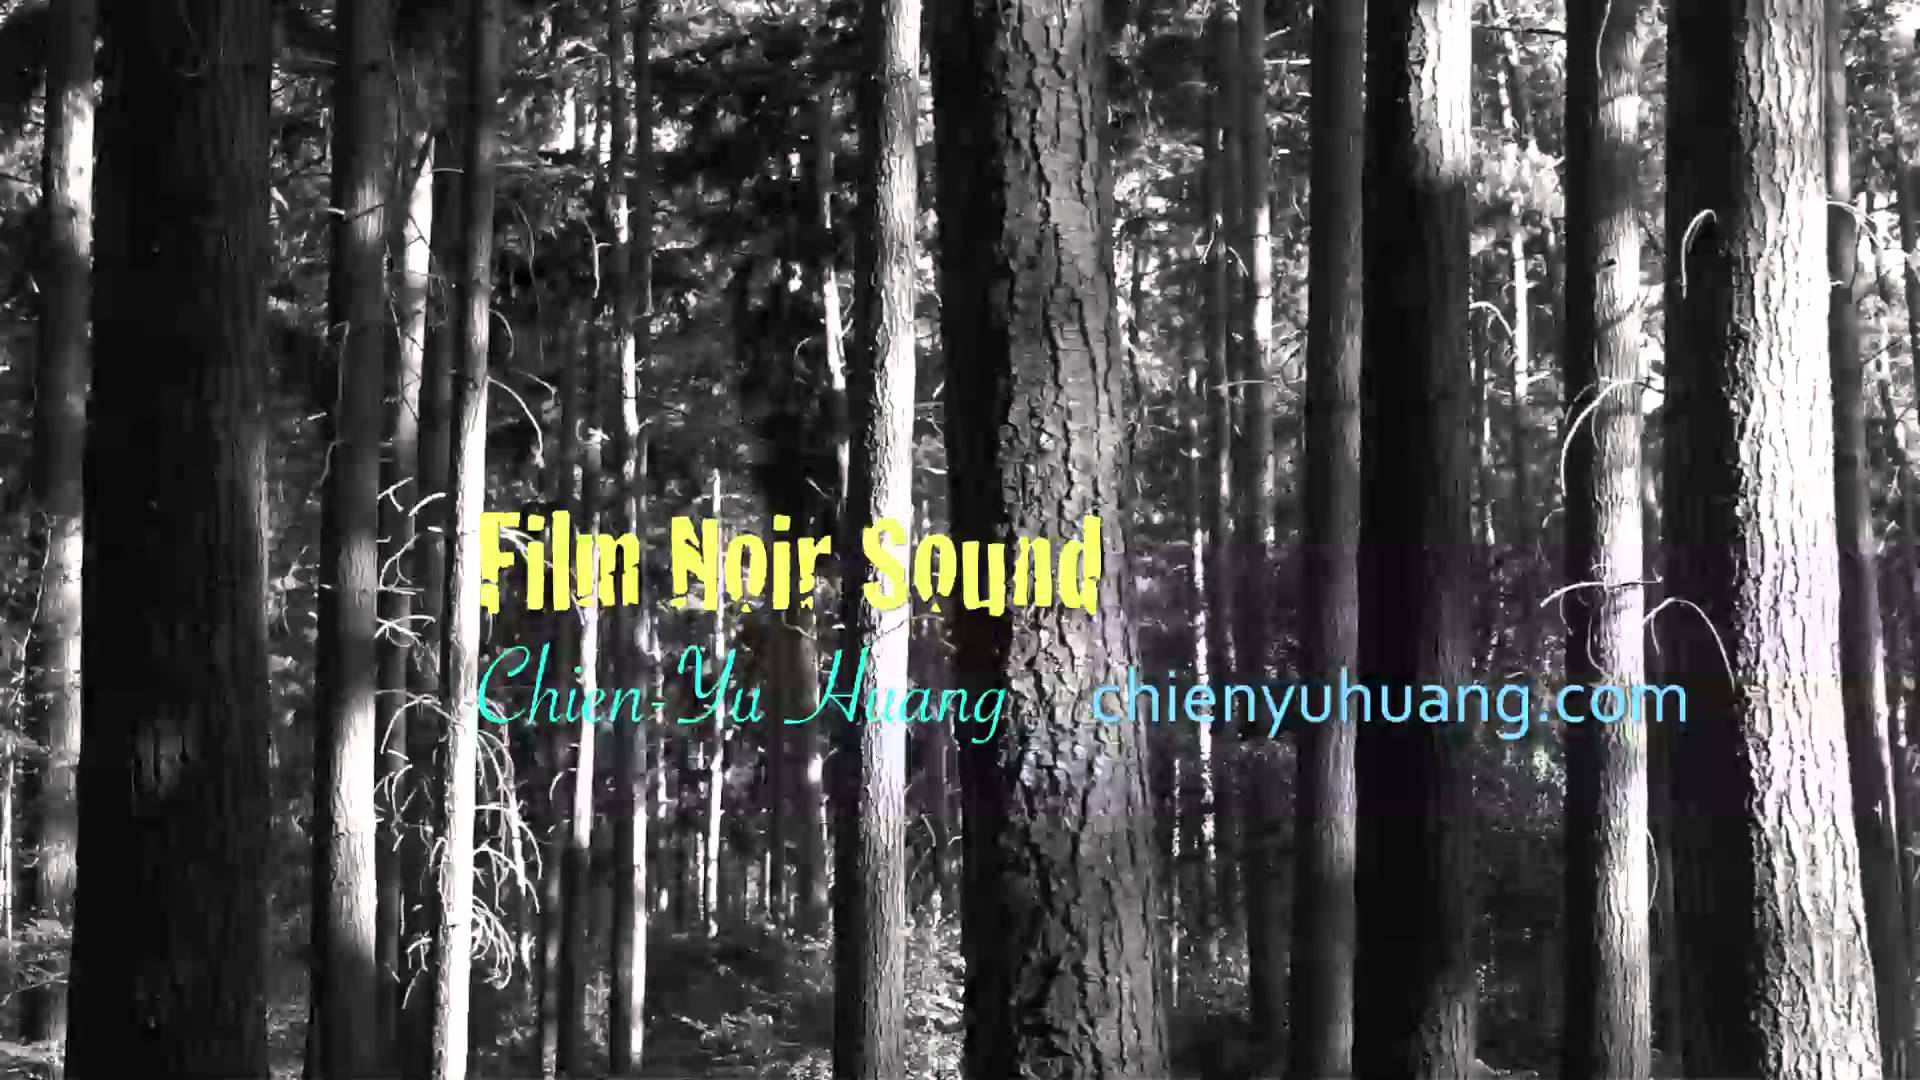 Featured image for “Film Noir Sound”